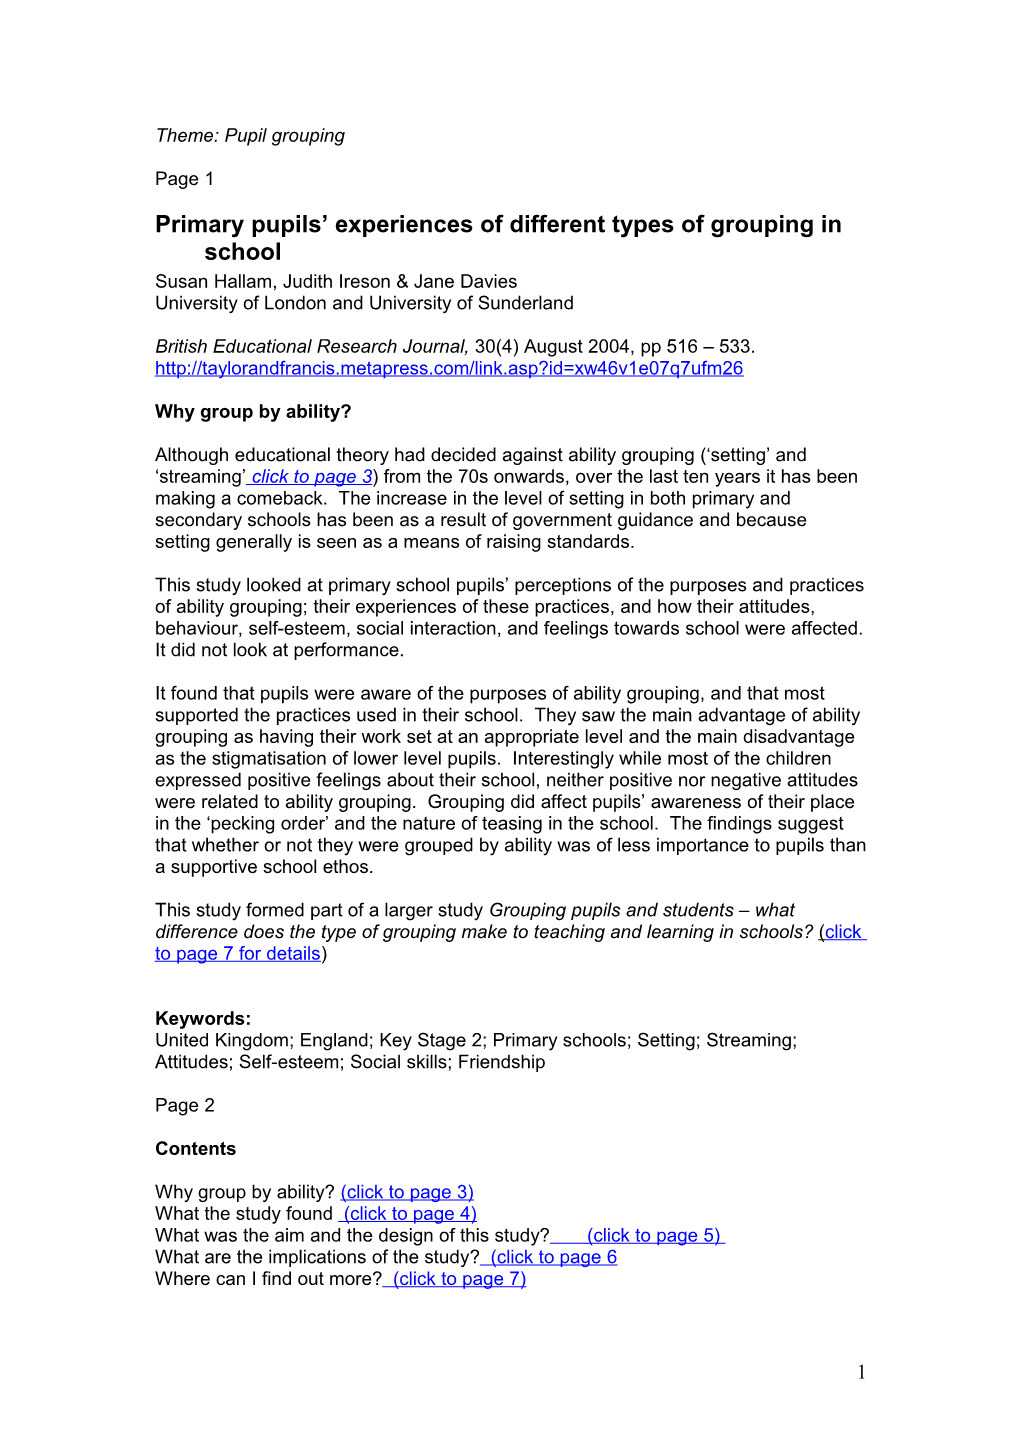 Primary Pupils Experiences of Different Types of Grouping in School